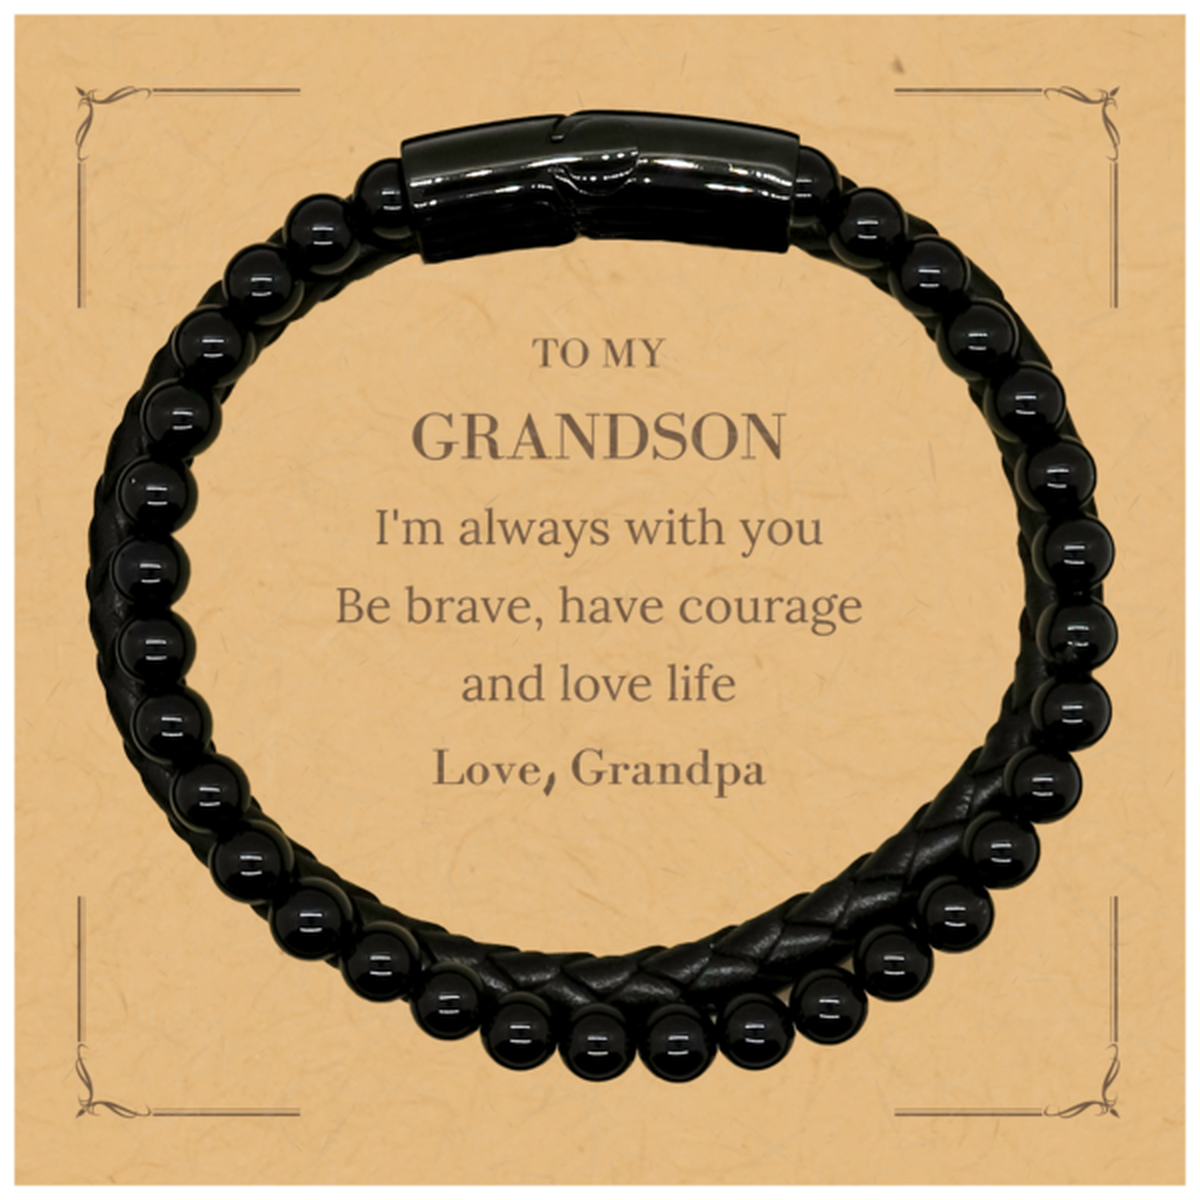 To My Grandson Gifts from Grandpa, Unique Stone Leather Bracelets Inspirational Christmas Birthday Graduation Gifts for Grandson I'm always with you. Be brave, have courage and love life. Love, Grandpa